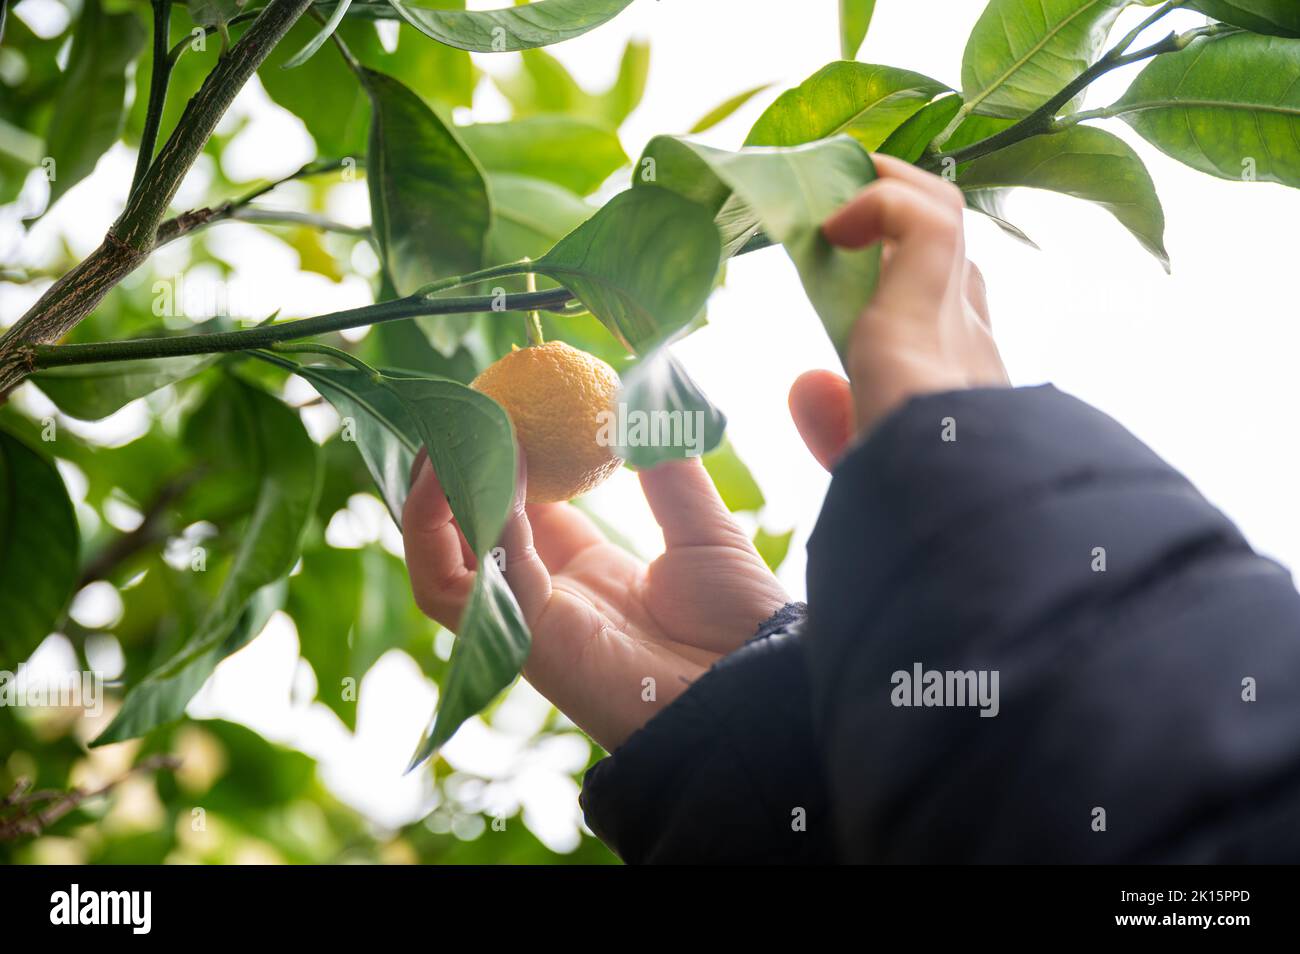 Low angle view of a child picking a ripe orange mandarine or tangerine growing on green tree in the spring. Stock Photo